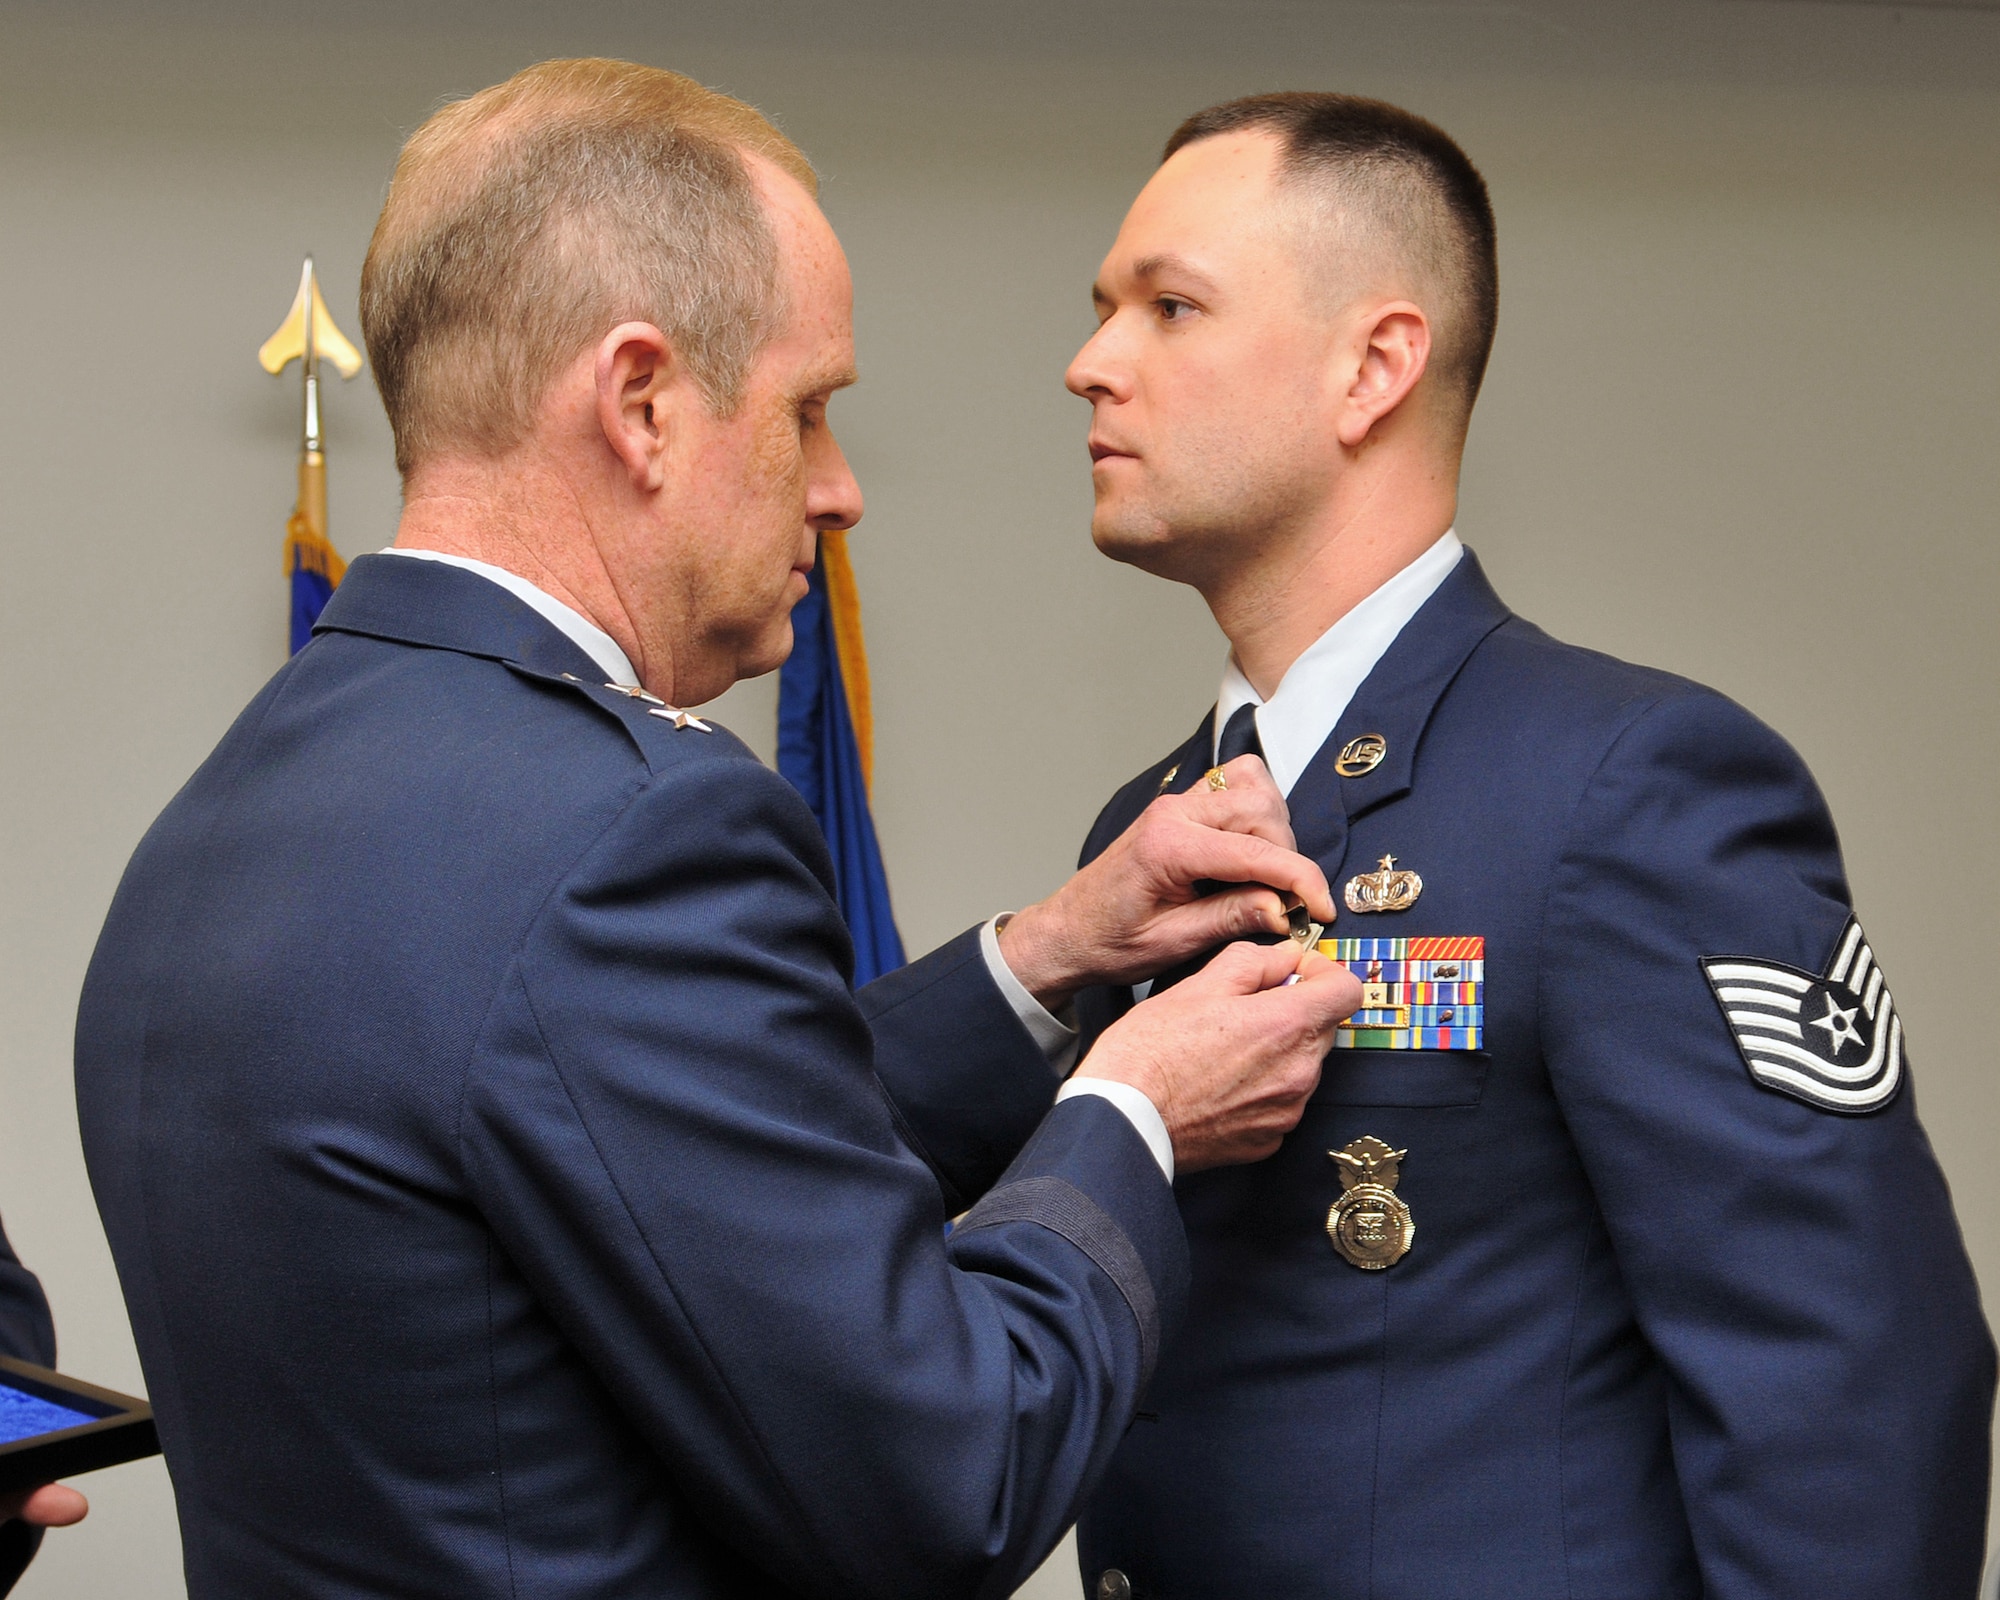 Maj. Gen. Donald P. Dunbar, adjutant general of Wisconsin, presents the Purple Heart to Tech. Sgt. Cristian A. Bennett, 115th Fighter Wing assistant program security manager, during a ceremony in Madison, Wis., Feb. 4. Bennett received the medal for injuries received when his Humvee was struck by an improvised explosive device during a security escort mission in Iraq on Feb. 24, 2006.  